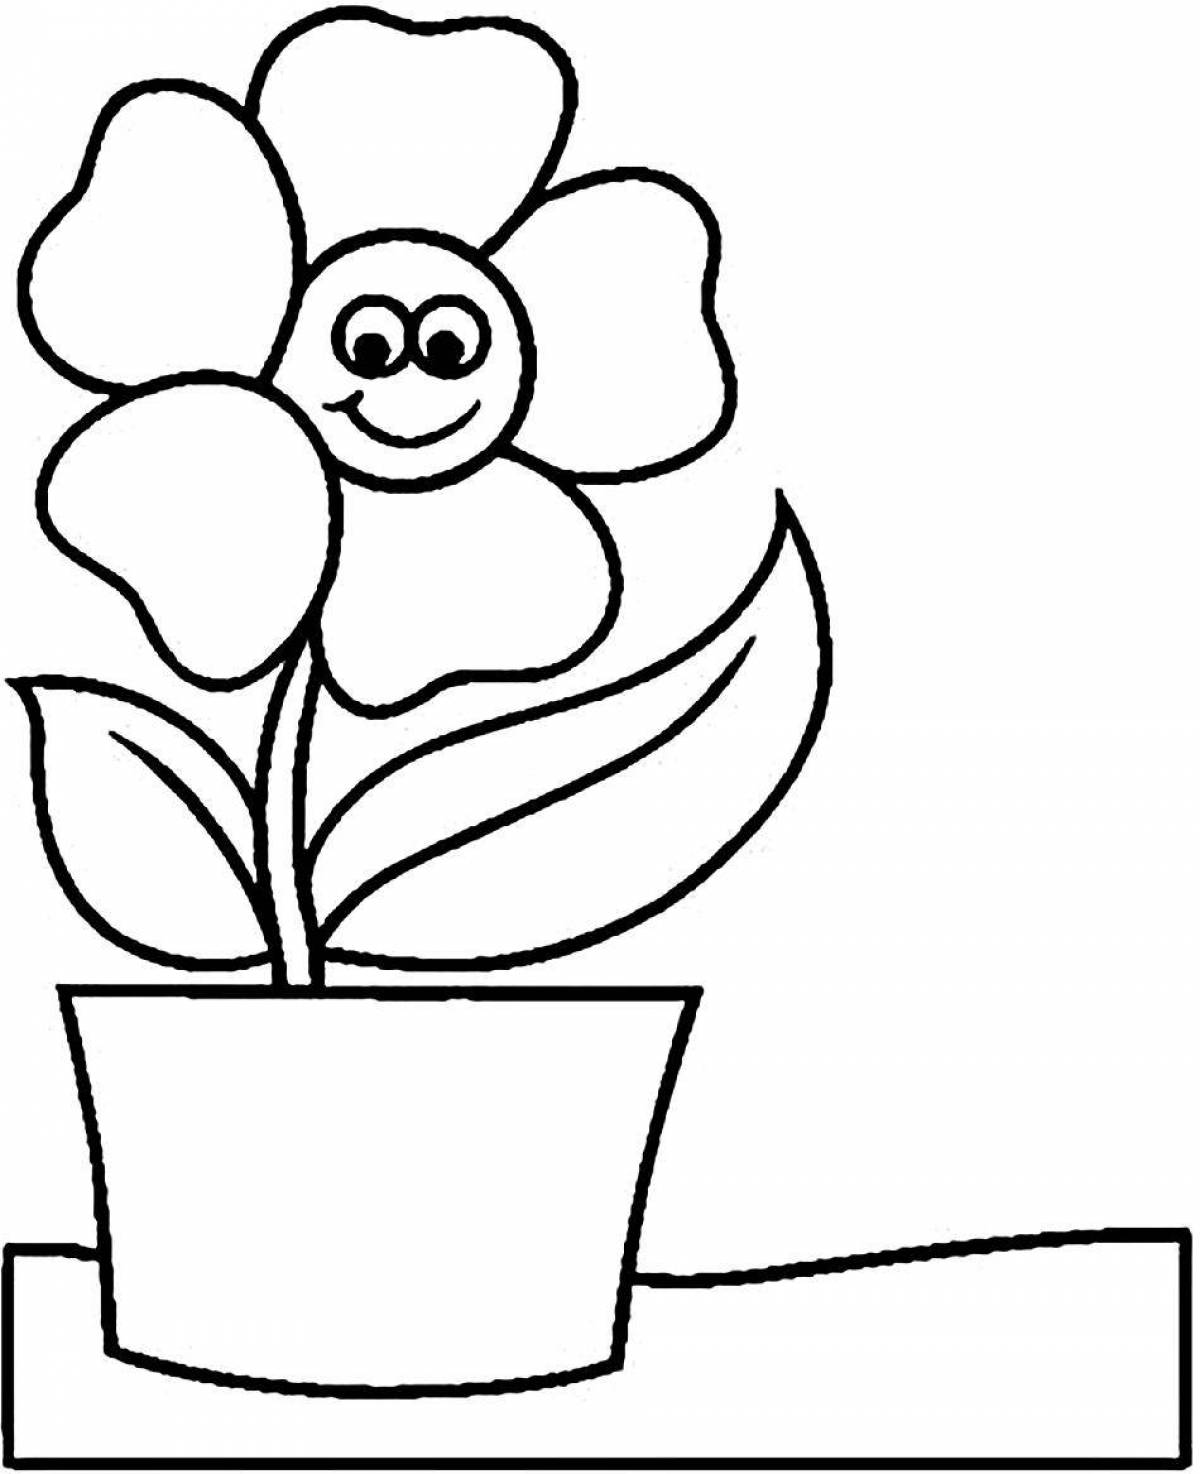 Adorable flower pot coloring page for kids